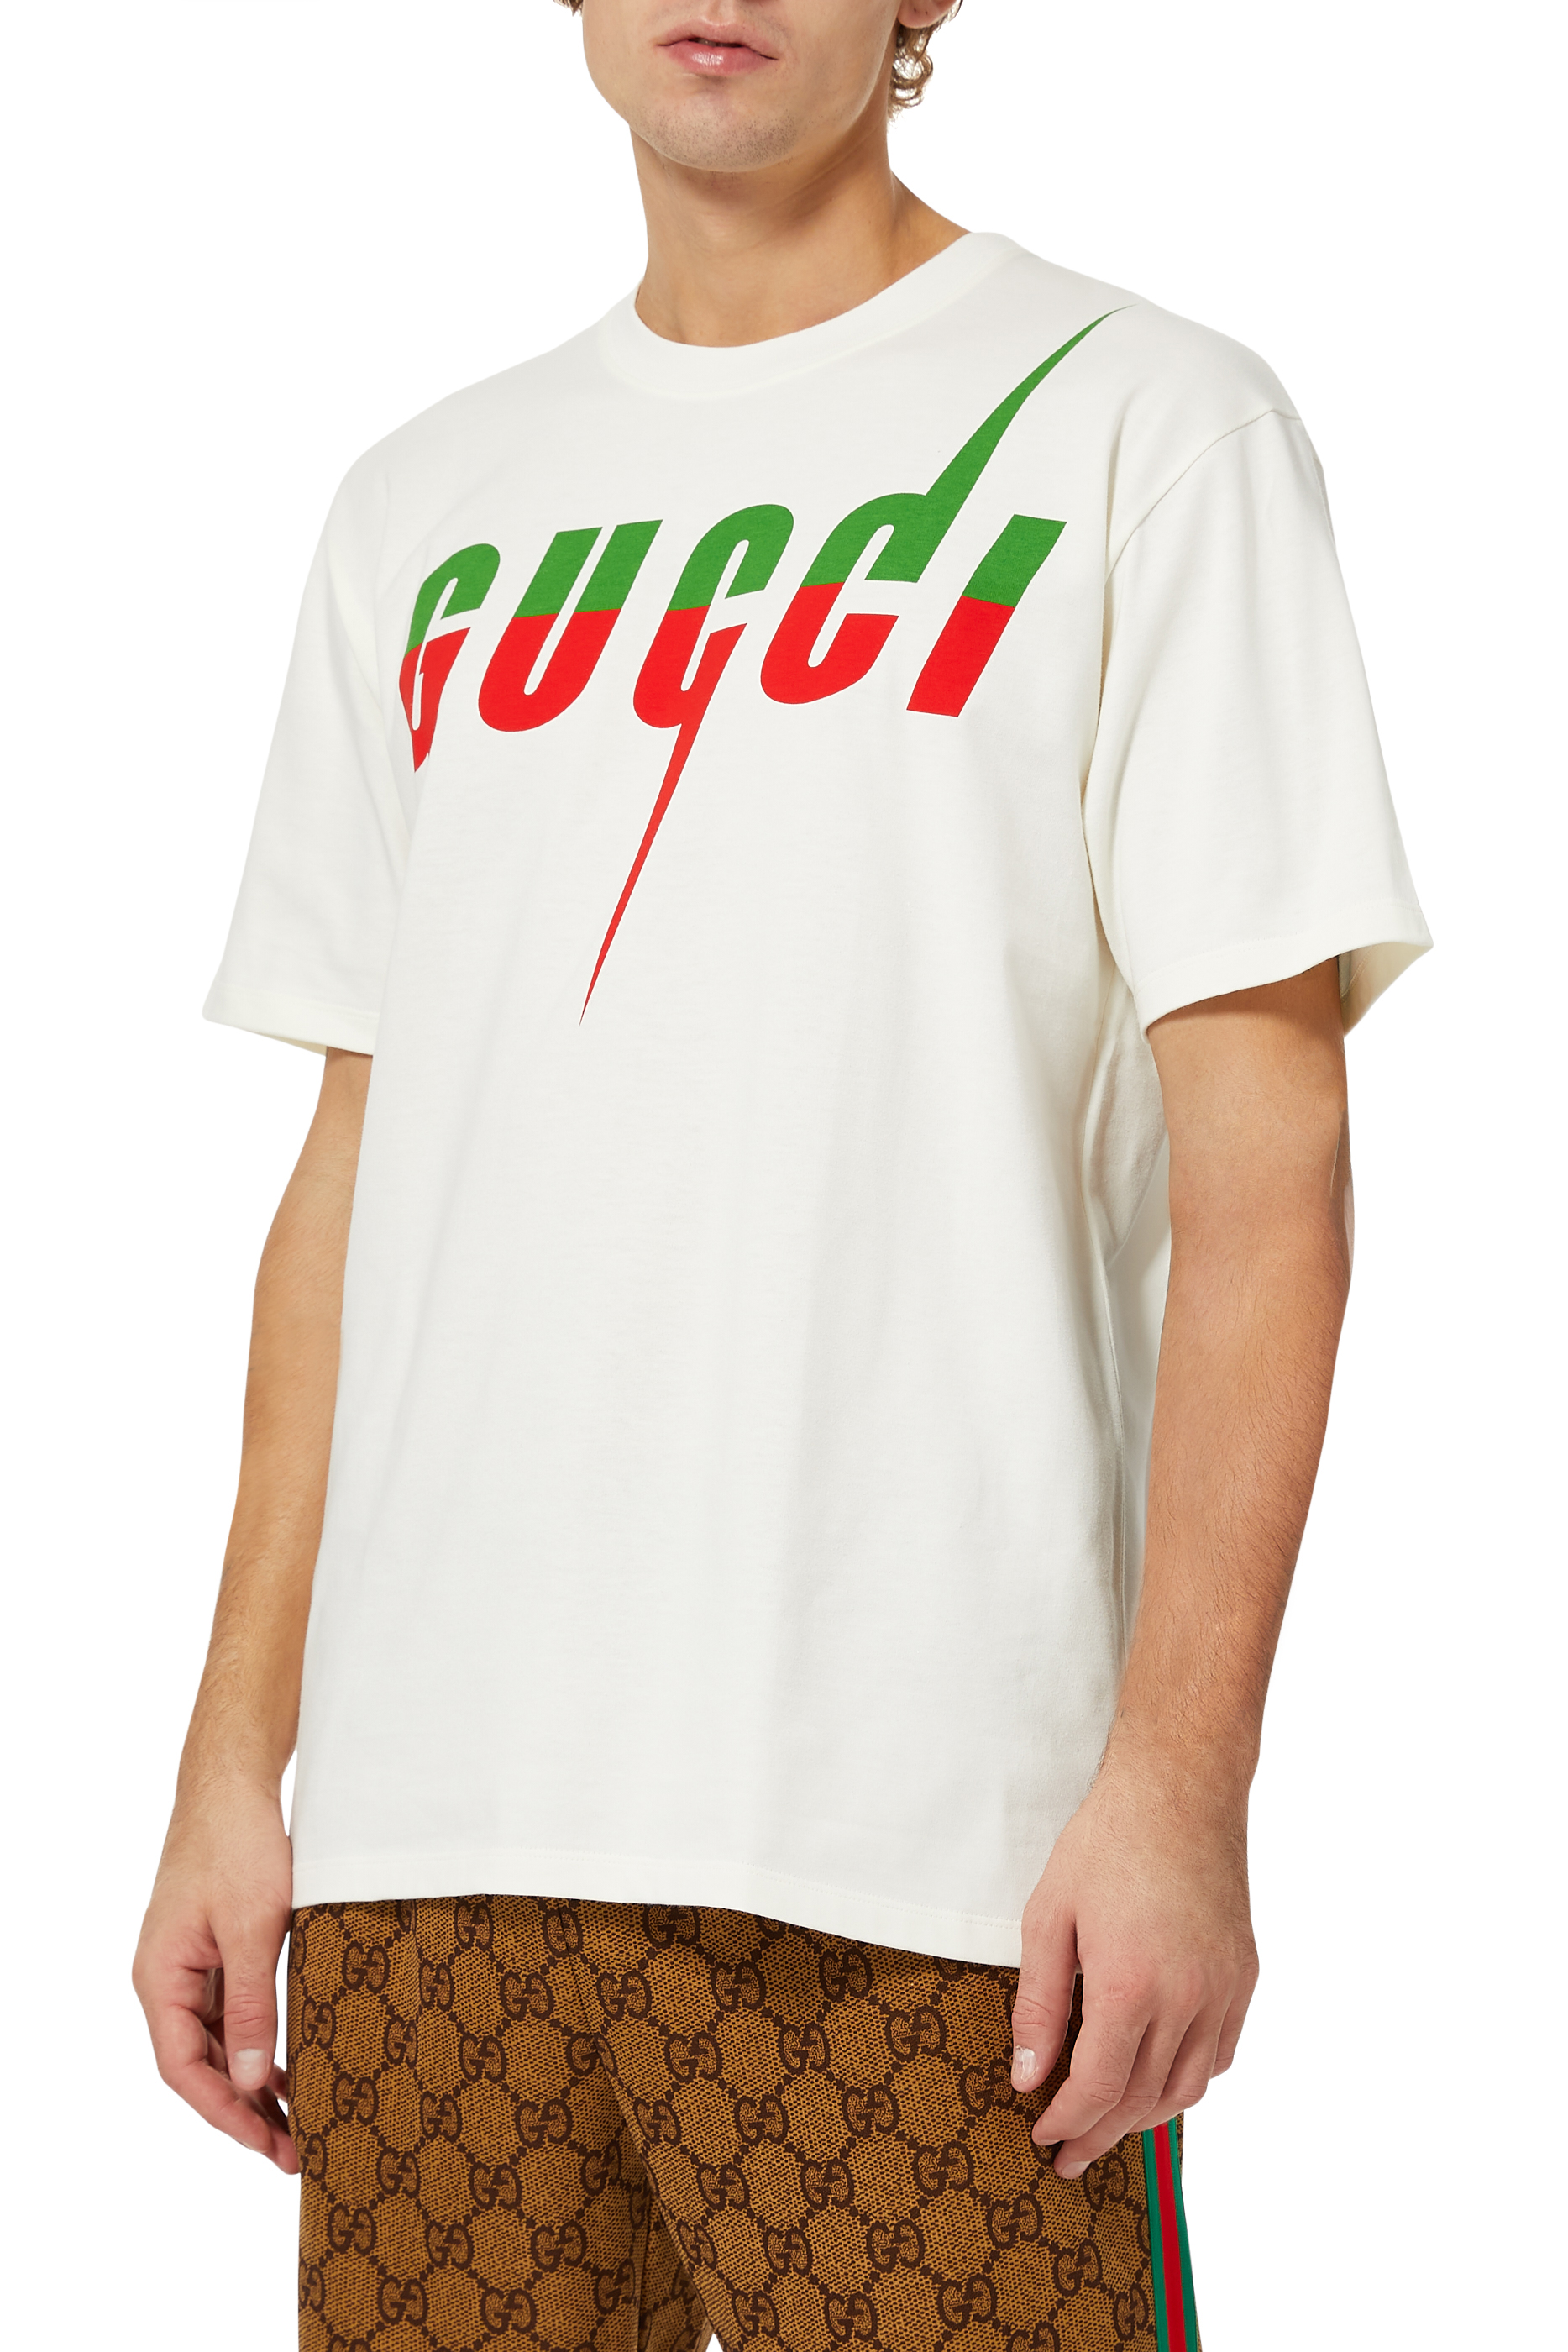 Recommendation prevent Polar bear Buy Gucci Logo Blade Print T-Shirt for Mens | Bloomingdale's UAE